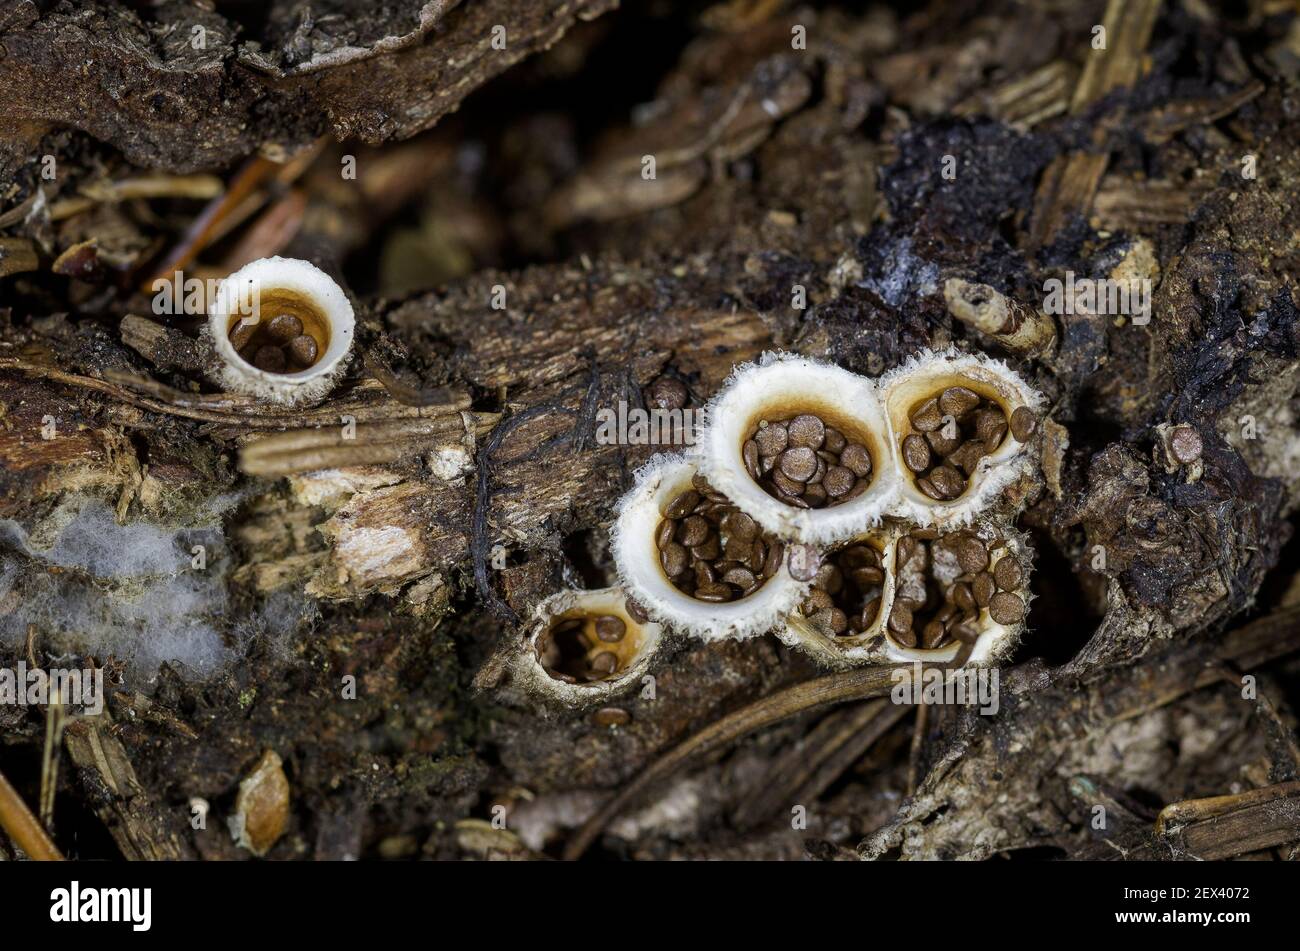 Common Bird's Nest Fungus (Crucibulum laeve), Linn County, Oregon. The spore packets (peridioles) are dispersed by rain drops splashing them out of th Stock Photo